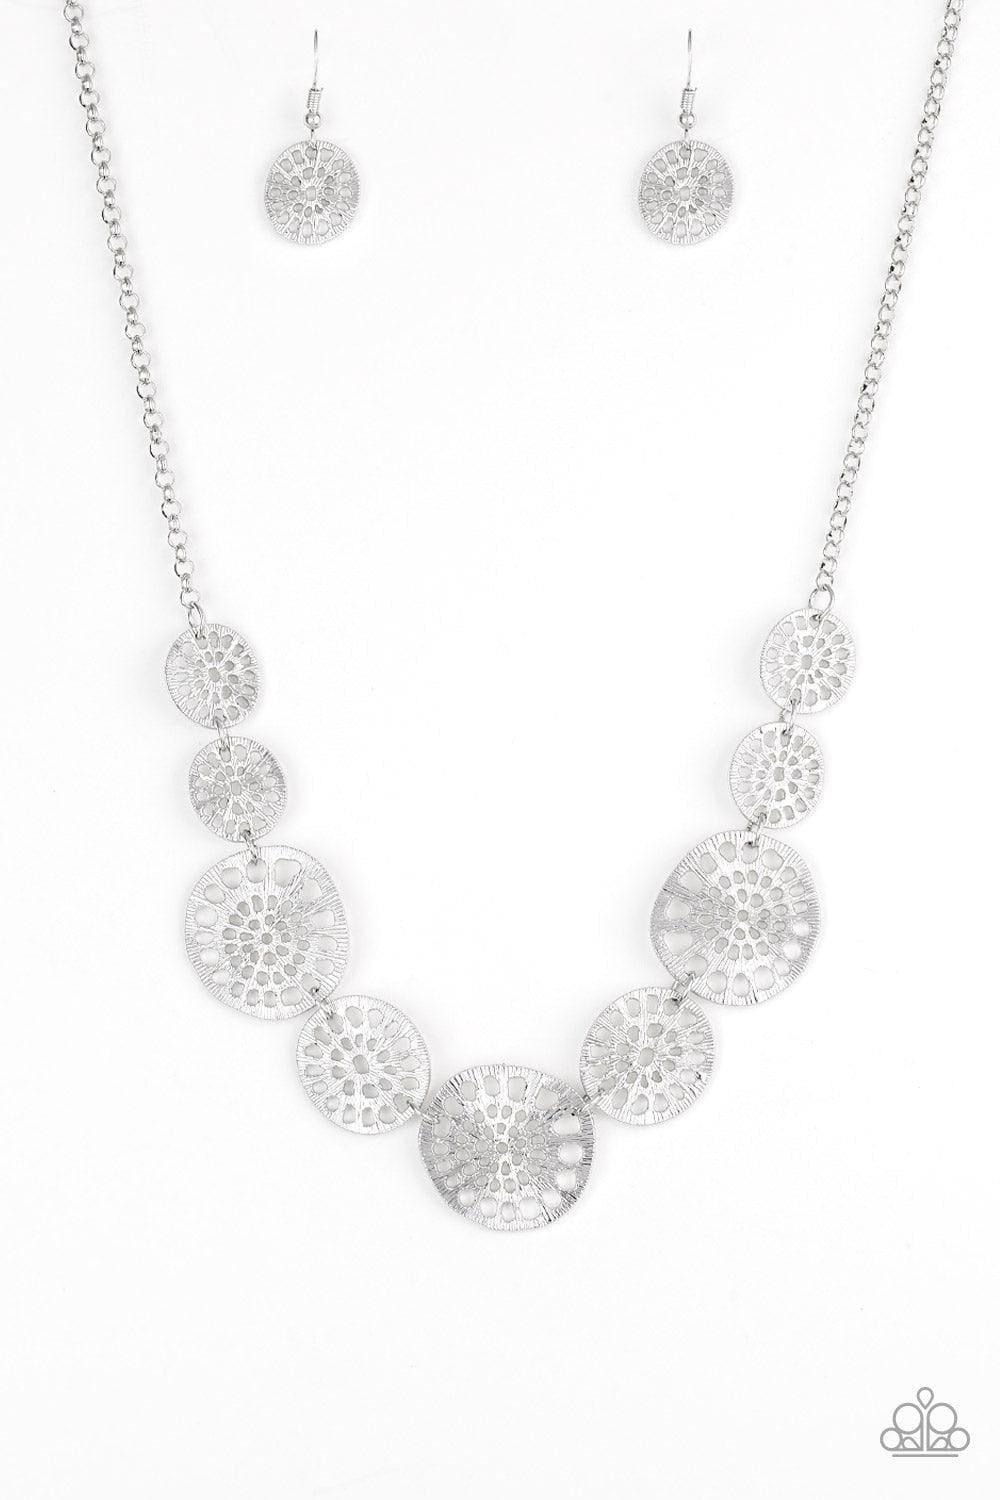 Paparazzi Accessories - Your Own Free Wheel - Silver Necklace - Bling by JessieK